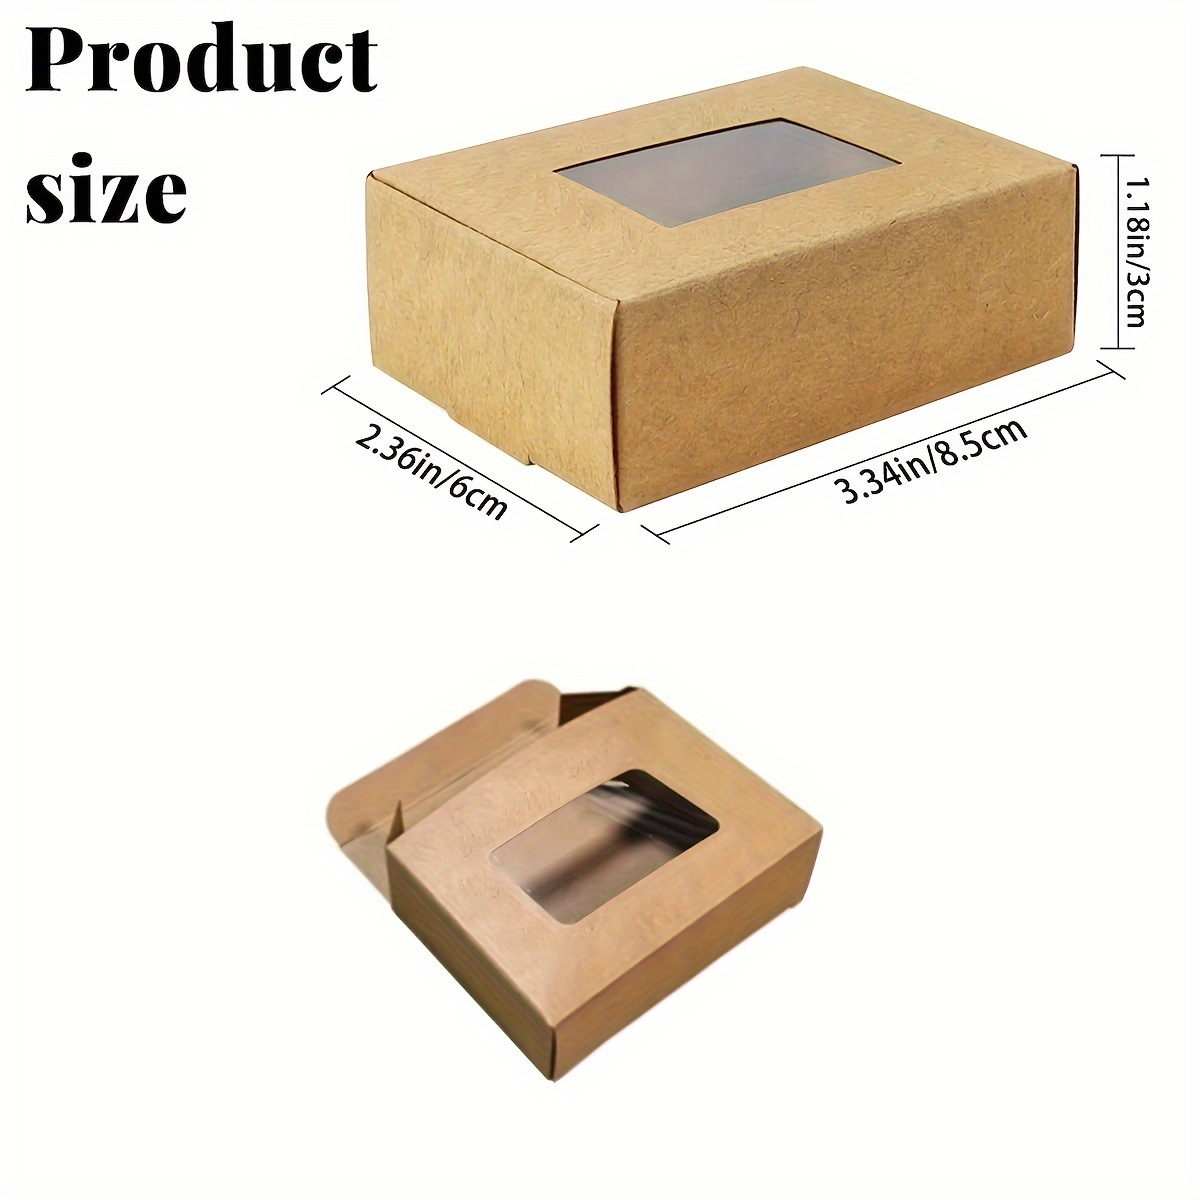 50 Corrugated Boxes With Window in Bulk, Kraft Display Gift